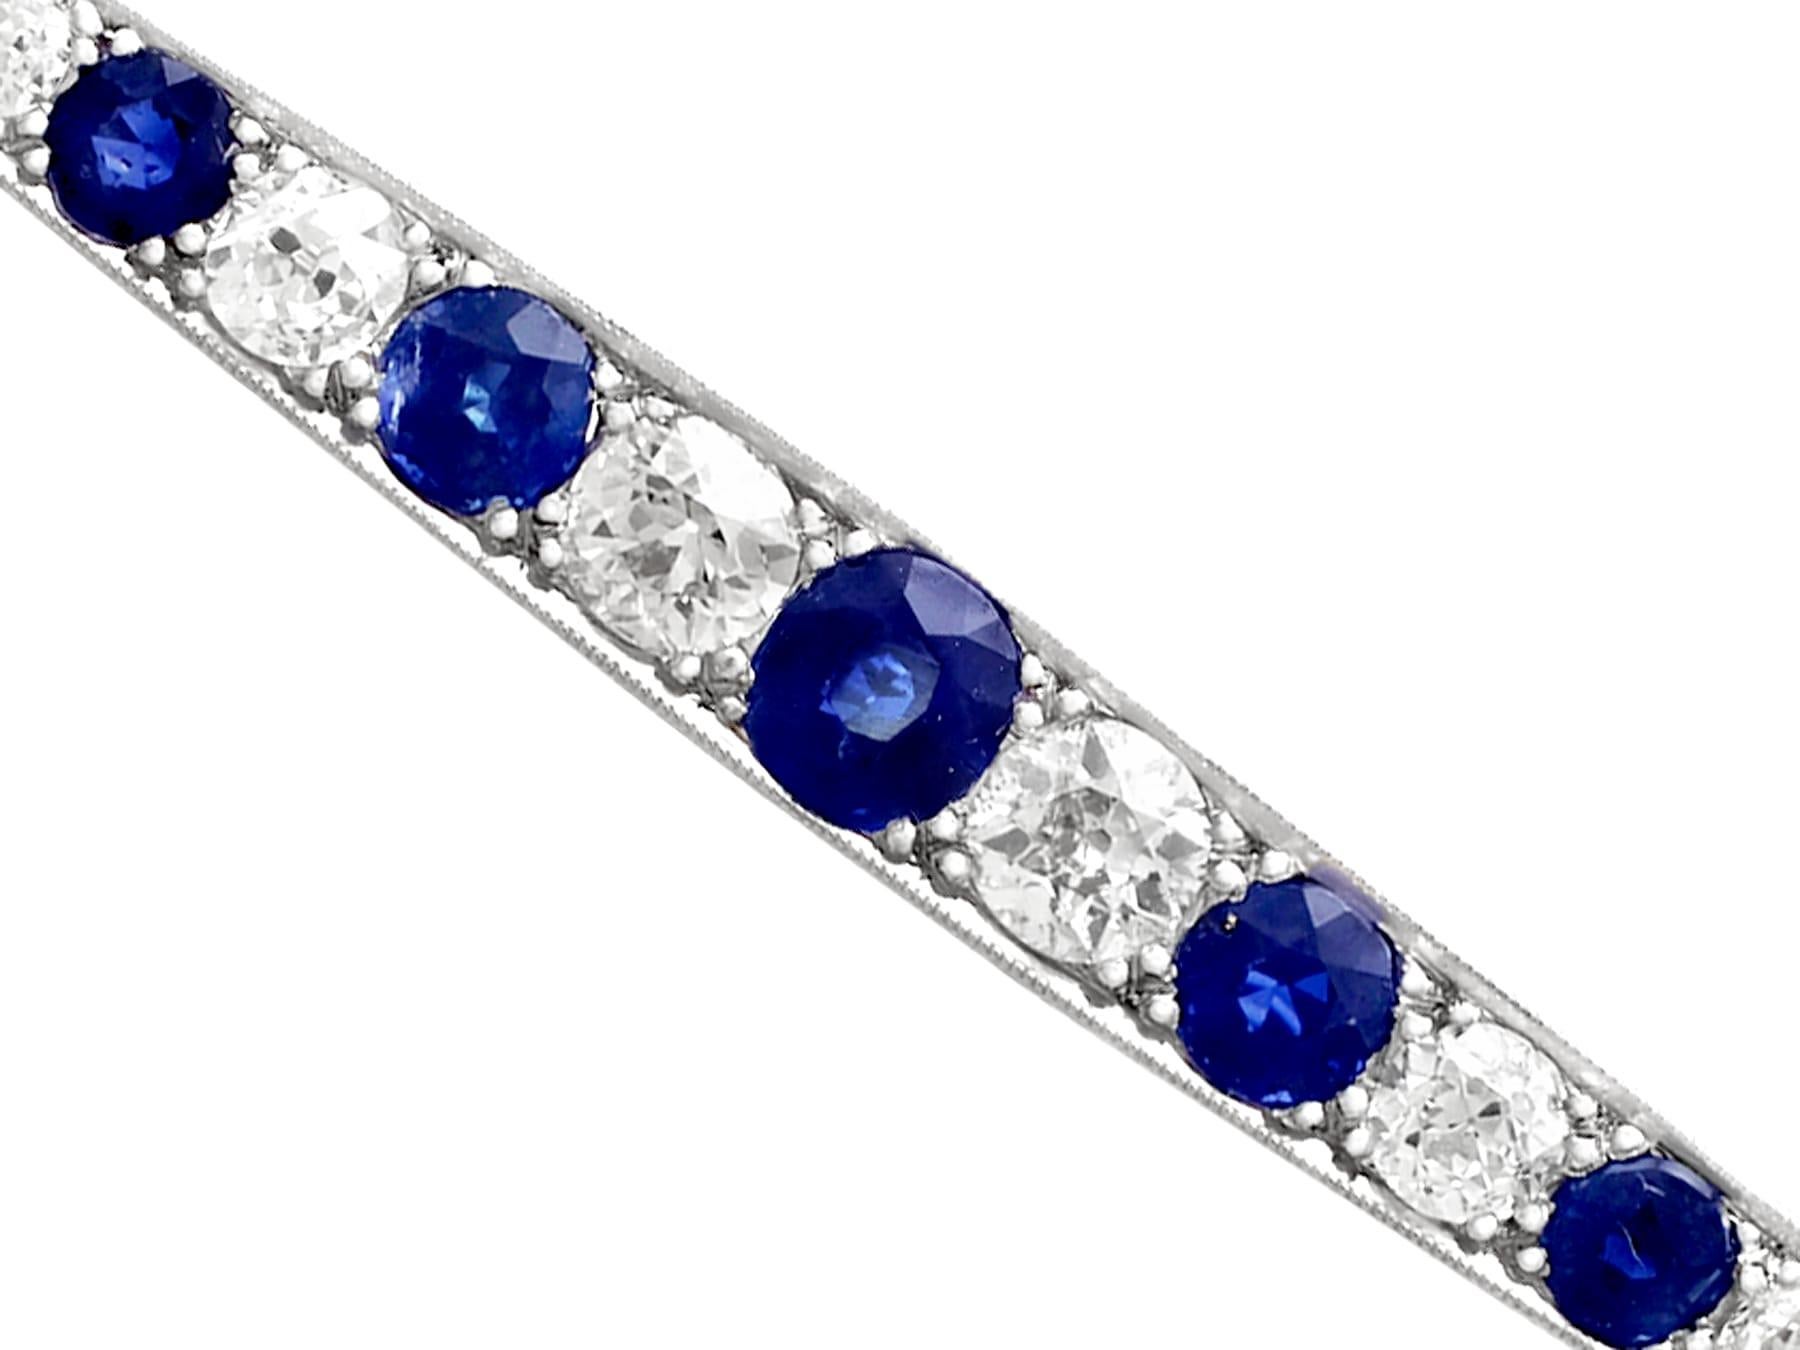 Old European Cut Antique 2.55 Carat Sapphire and 2.28 Carat Diamond White Gold Bar Brooch For Sale